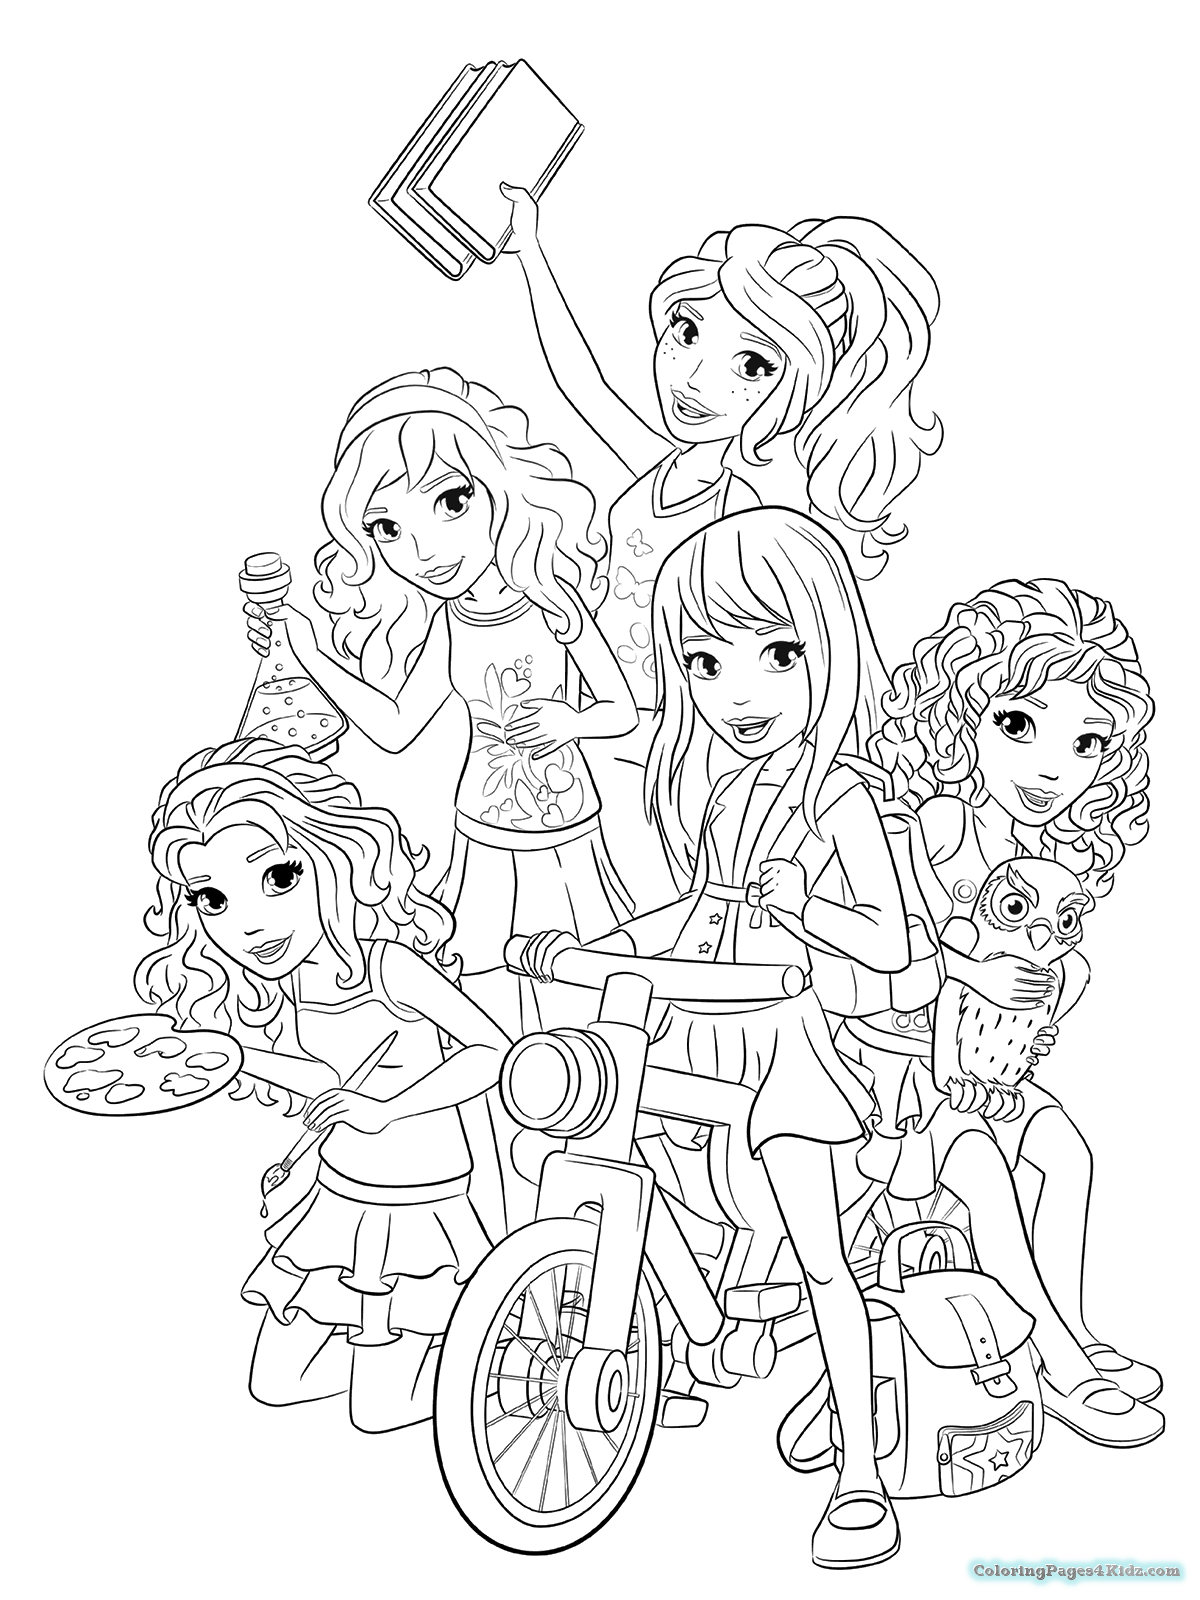 Lego Friends Coloring Pages   Childlife.me   Lego Coloring Pages ...